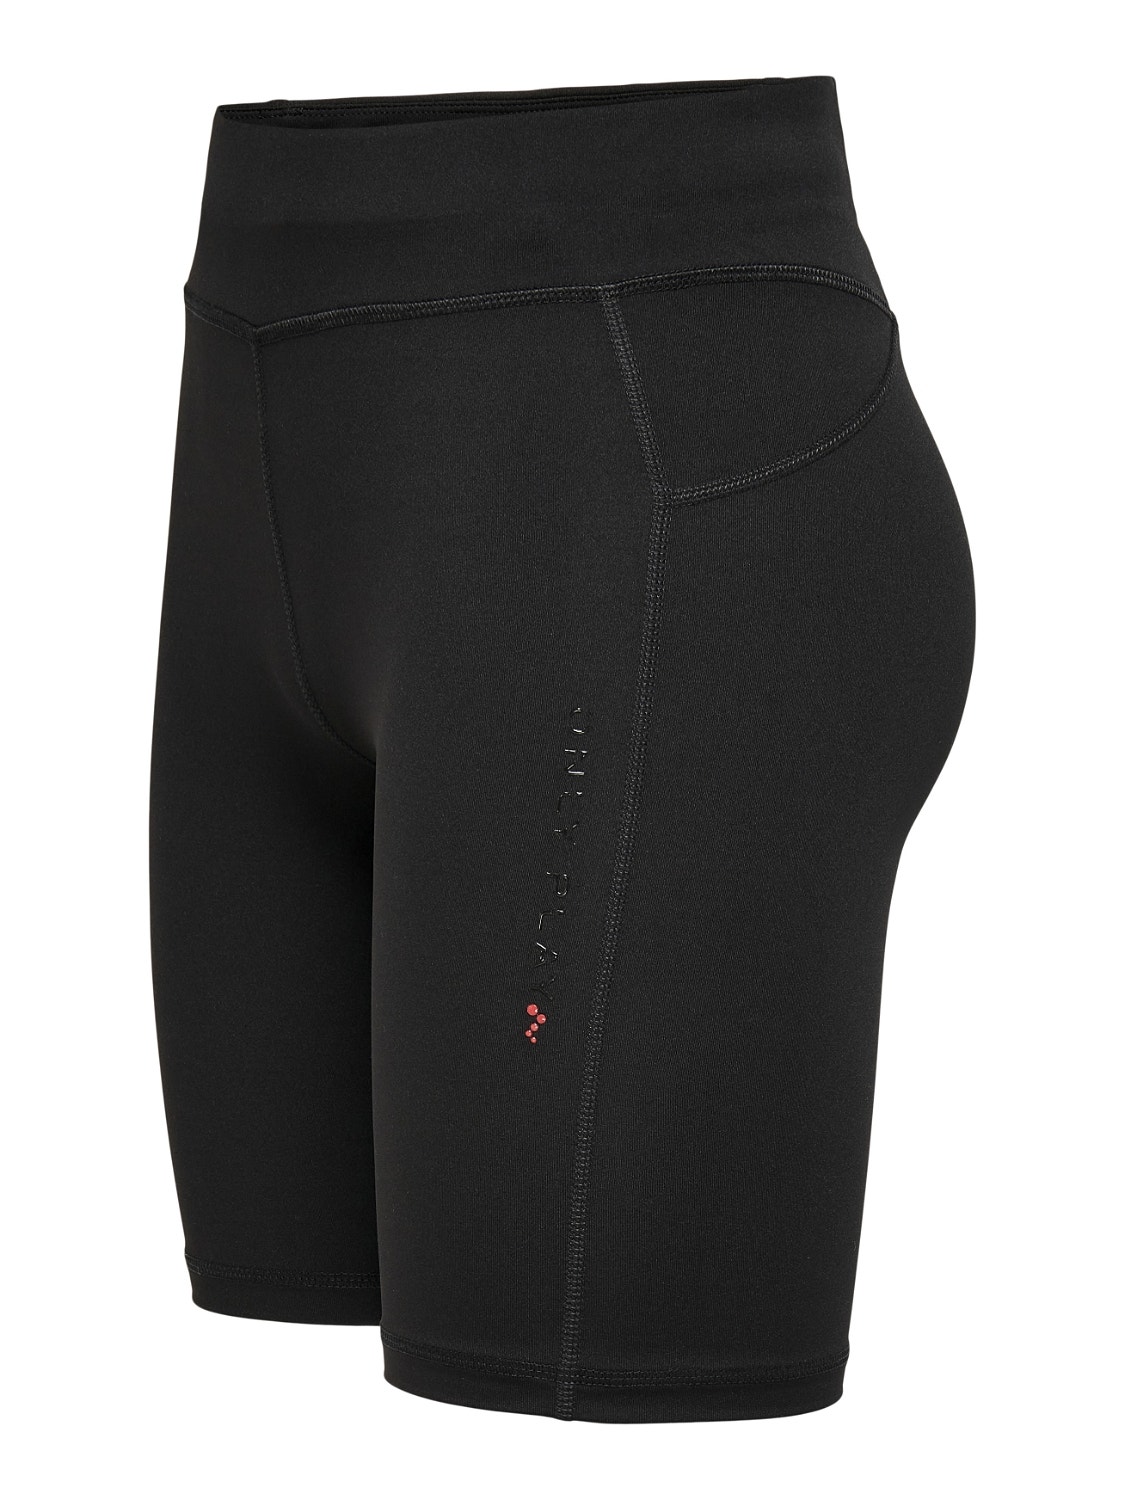 ONLY Course Short -Black - 15189262